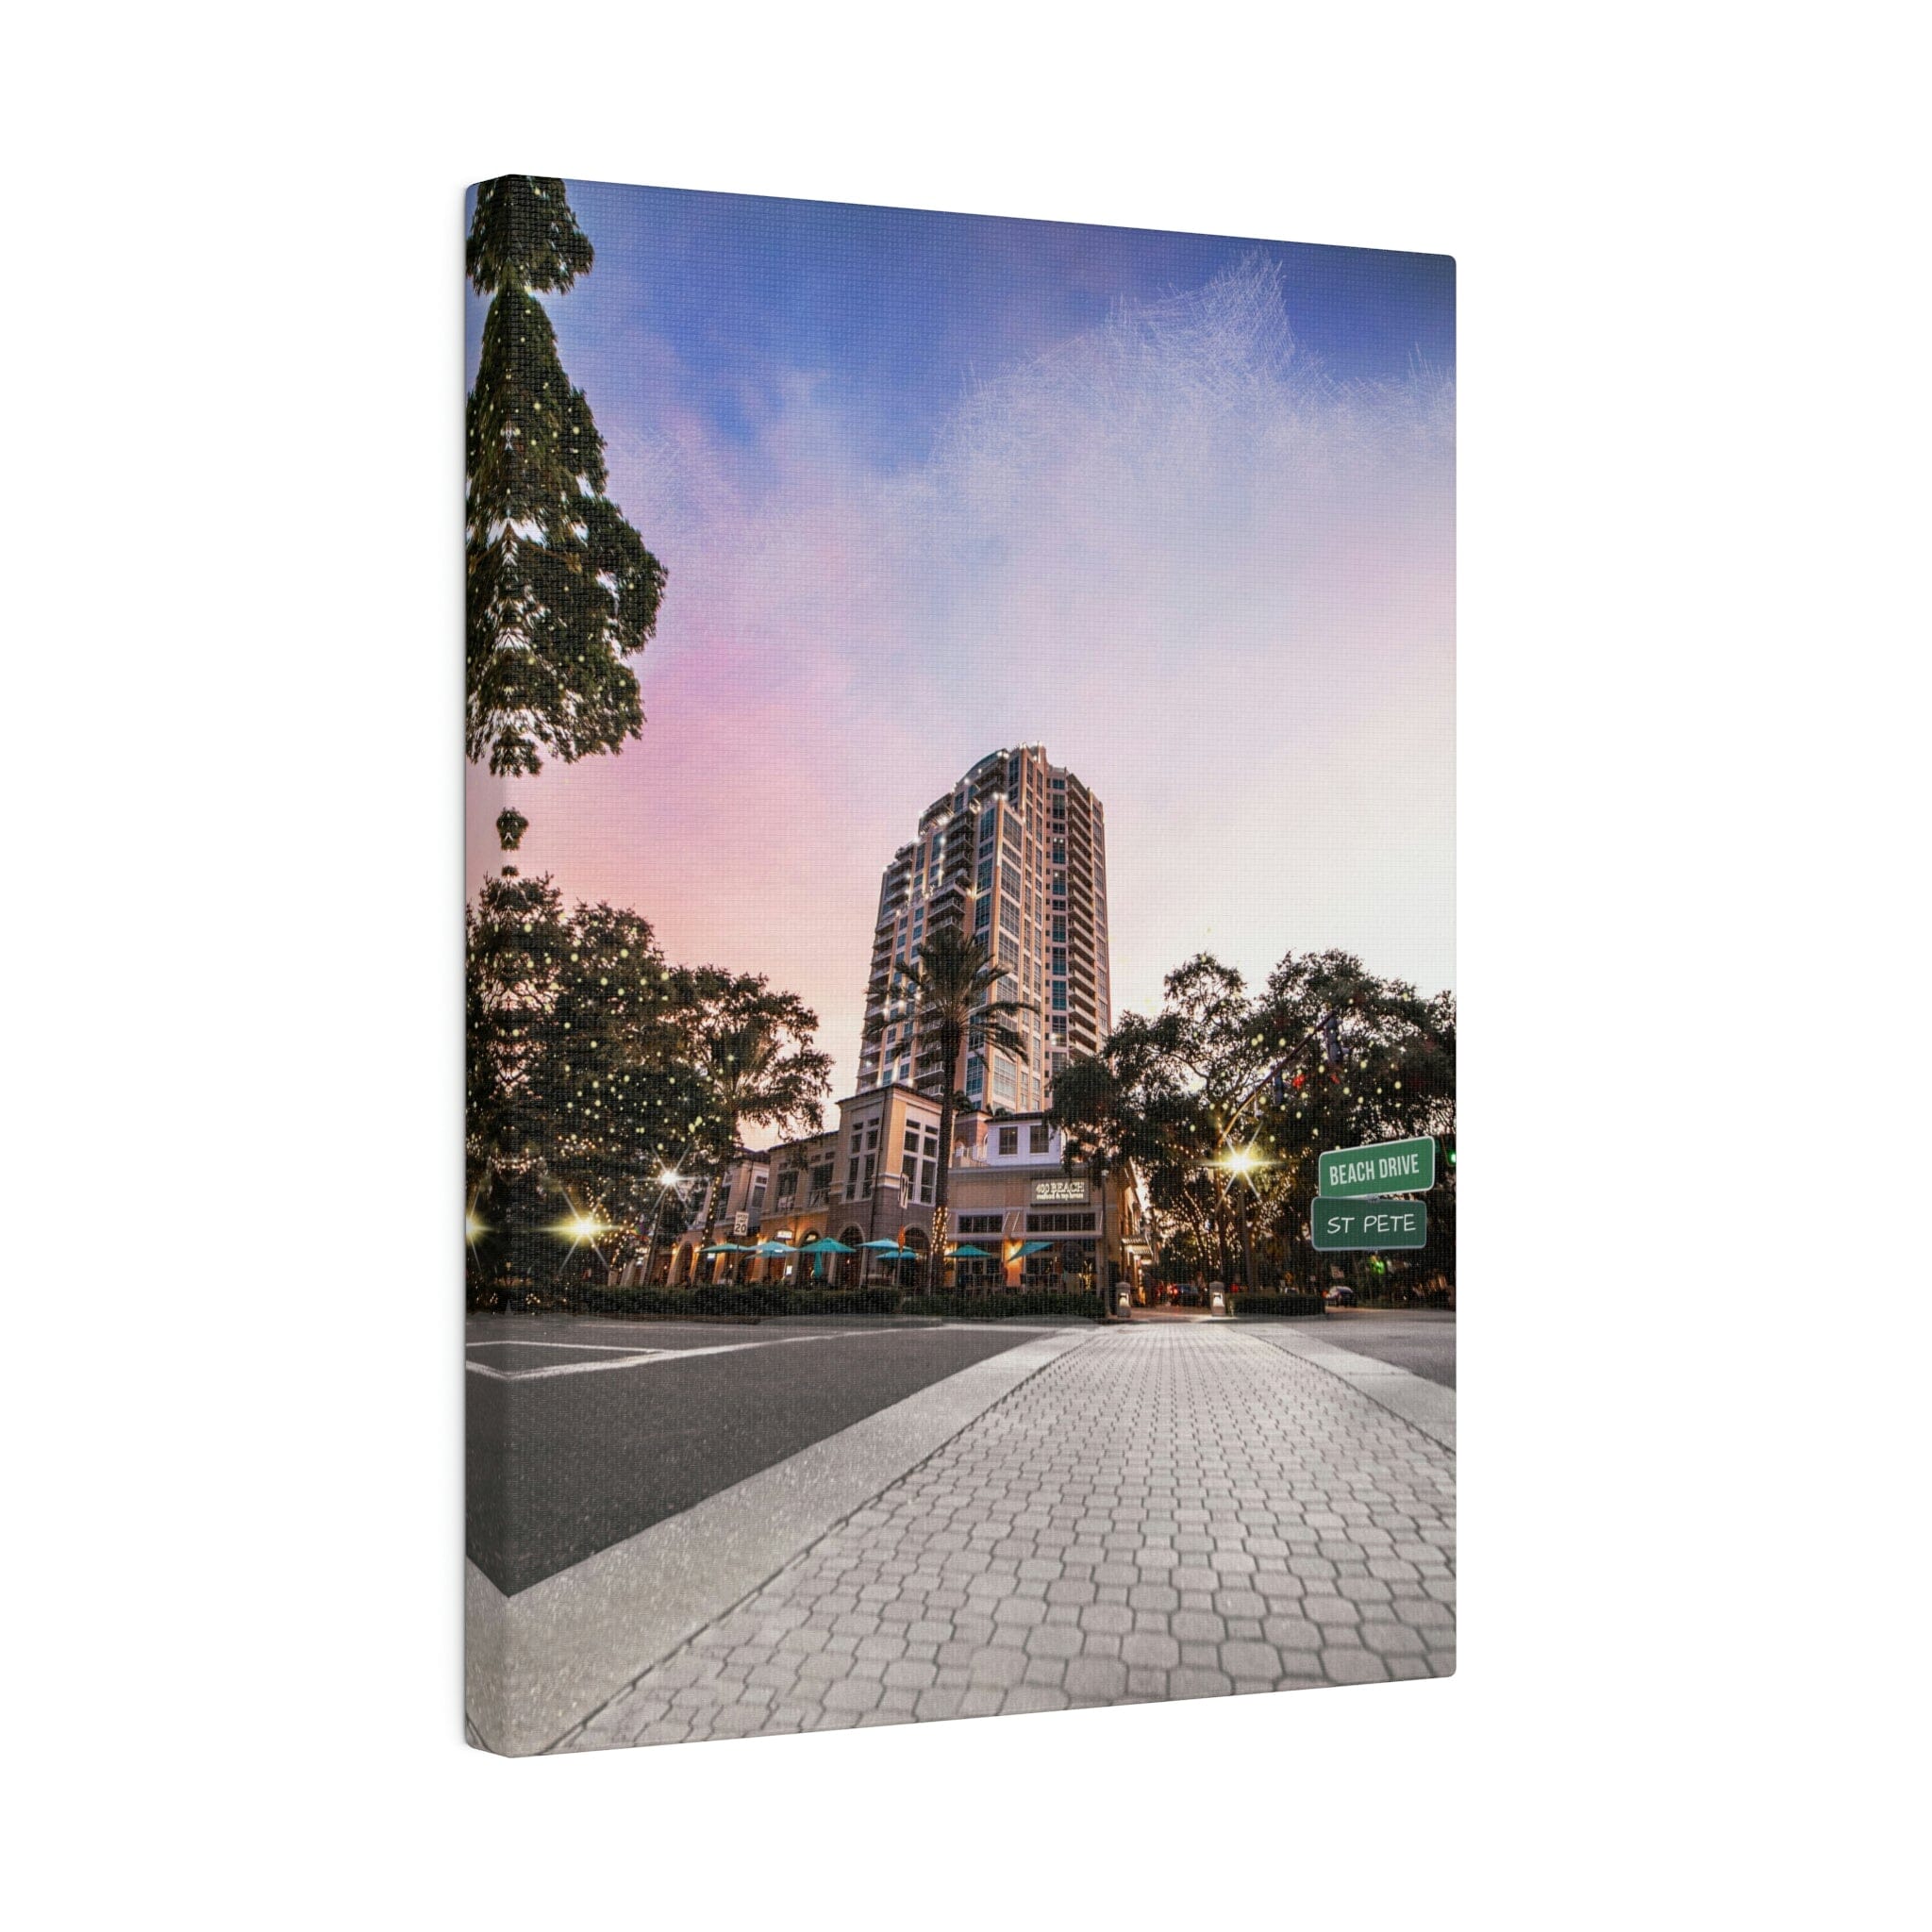 Matte Canvas, Stretched, 0.75" Canvas Printify